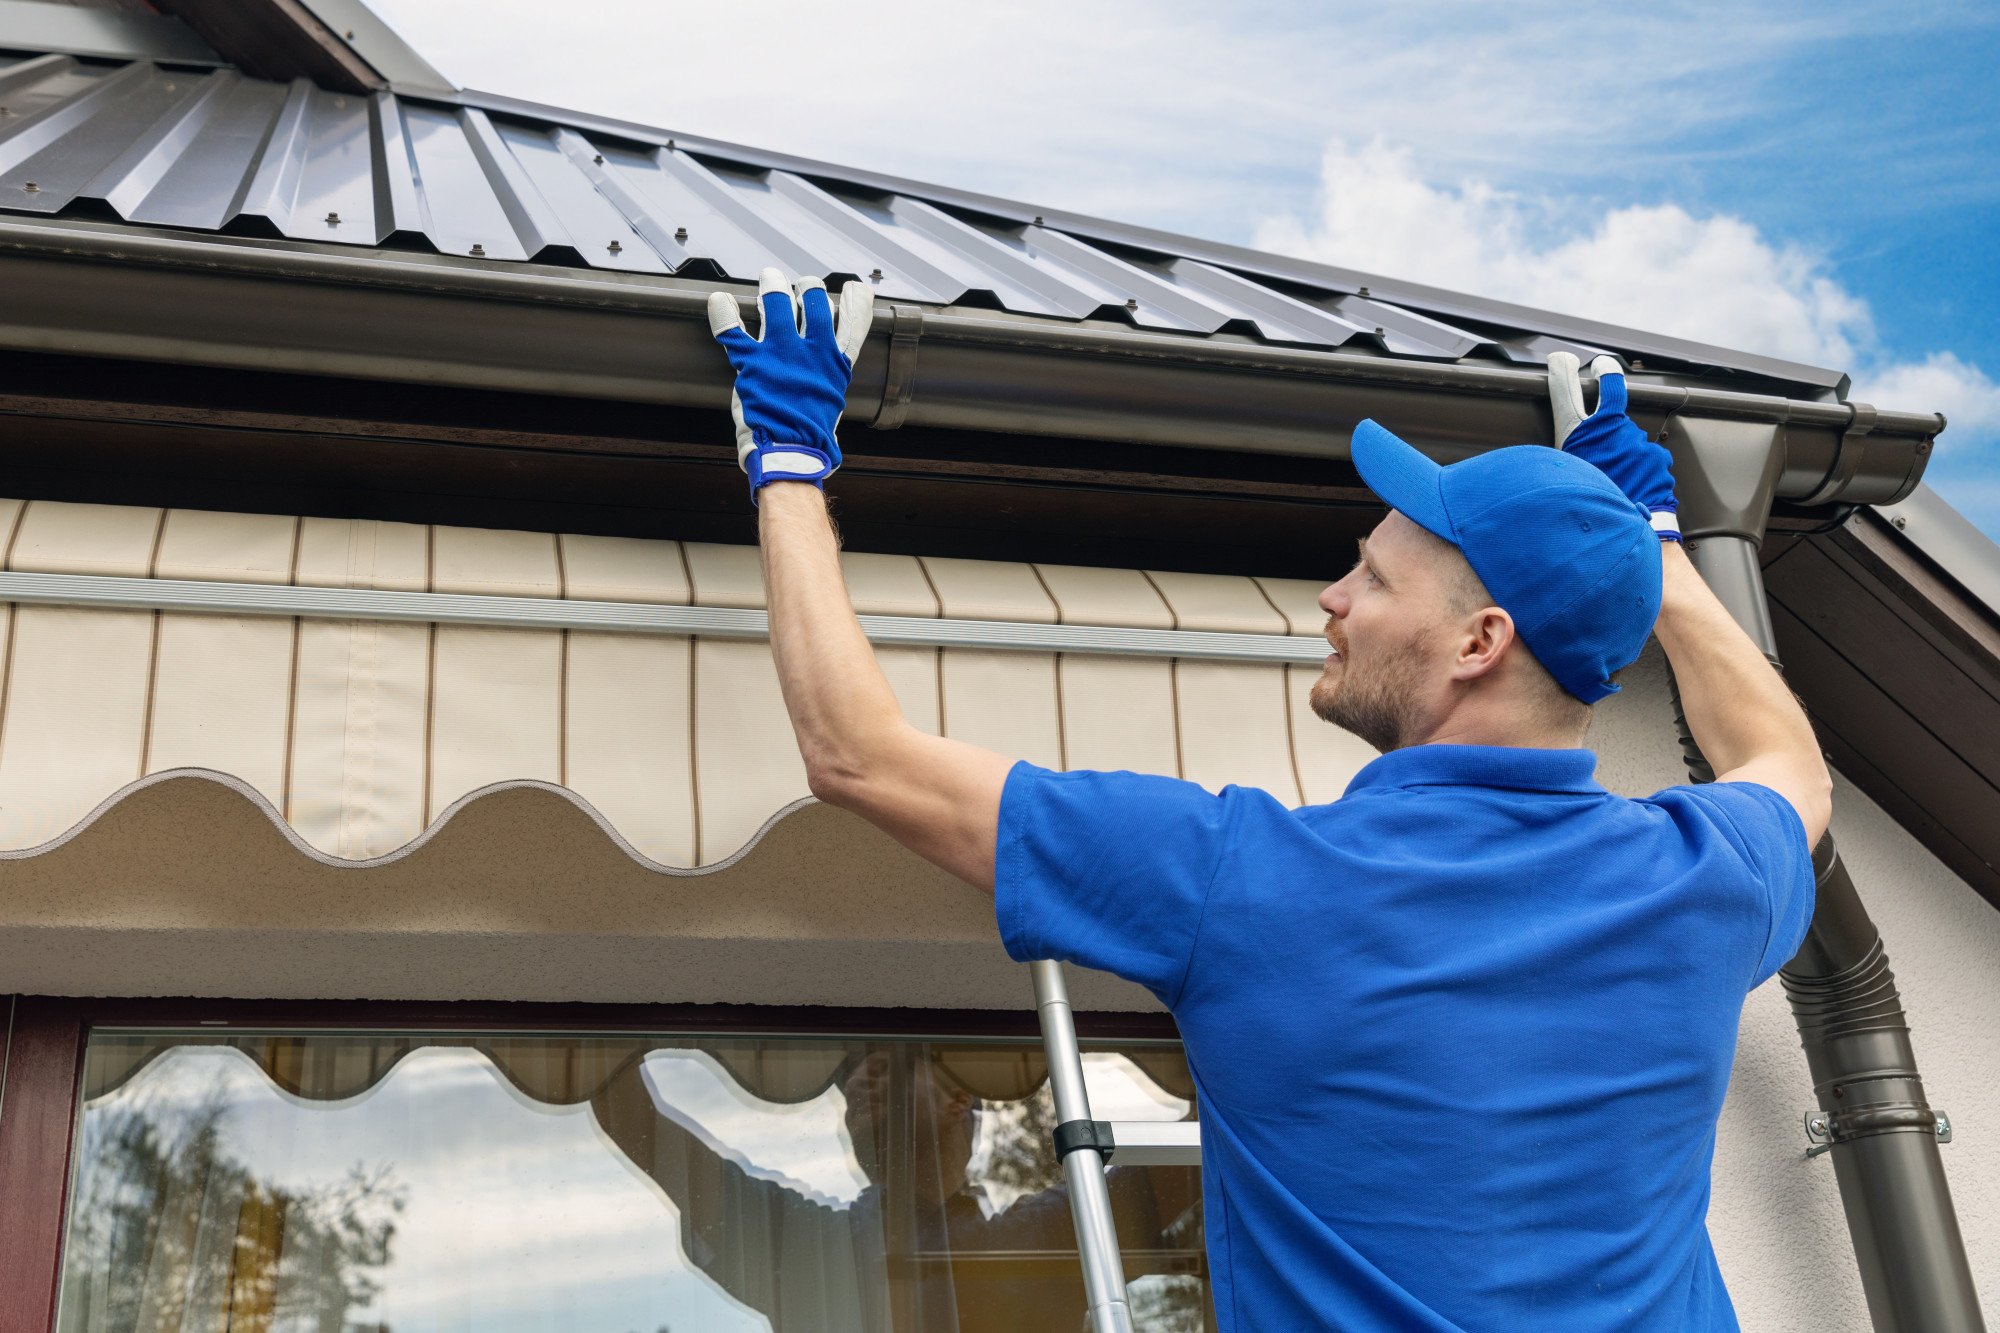 When it comes to roof and gutter replacement, you should know the prices you can expect to pay. Luckily, this guide has you covered.